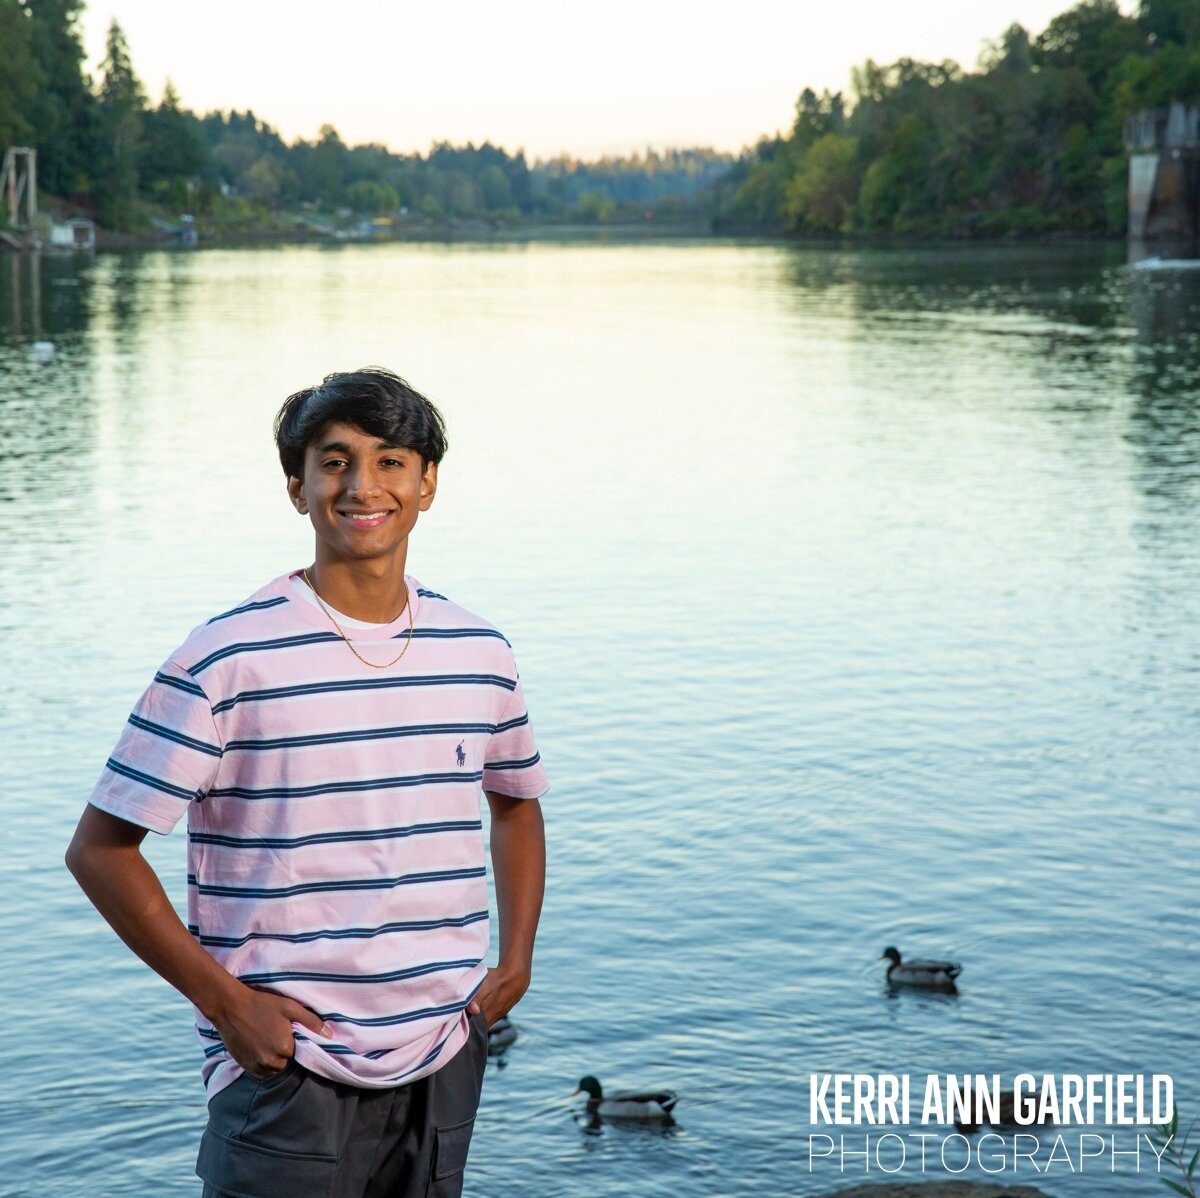 I love photographing by the river at the end of the day - it adds such a nice element to photos!  We finished up Akshay's senior photo shoot by the Willamette and were rewarded with some beautiful lighting. Enjoy! 📸
@akshay.moorthy 

#kerrianngarfie